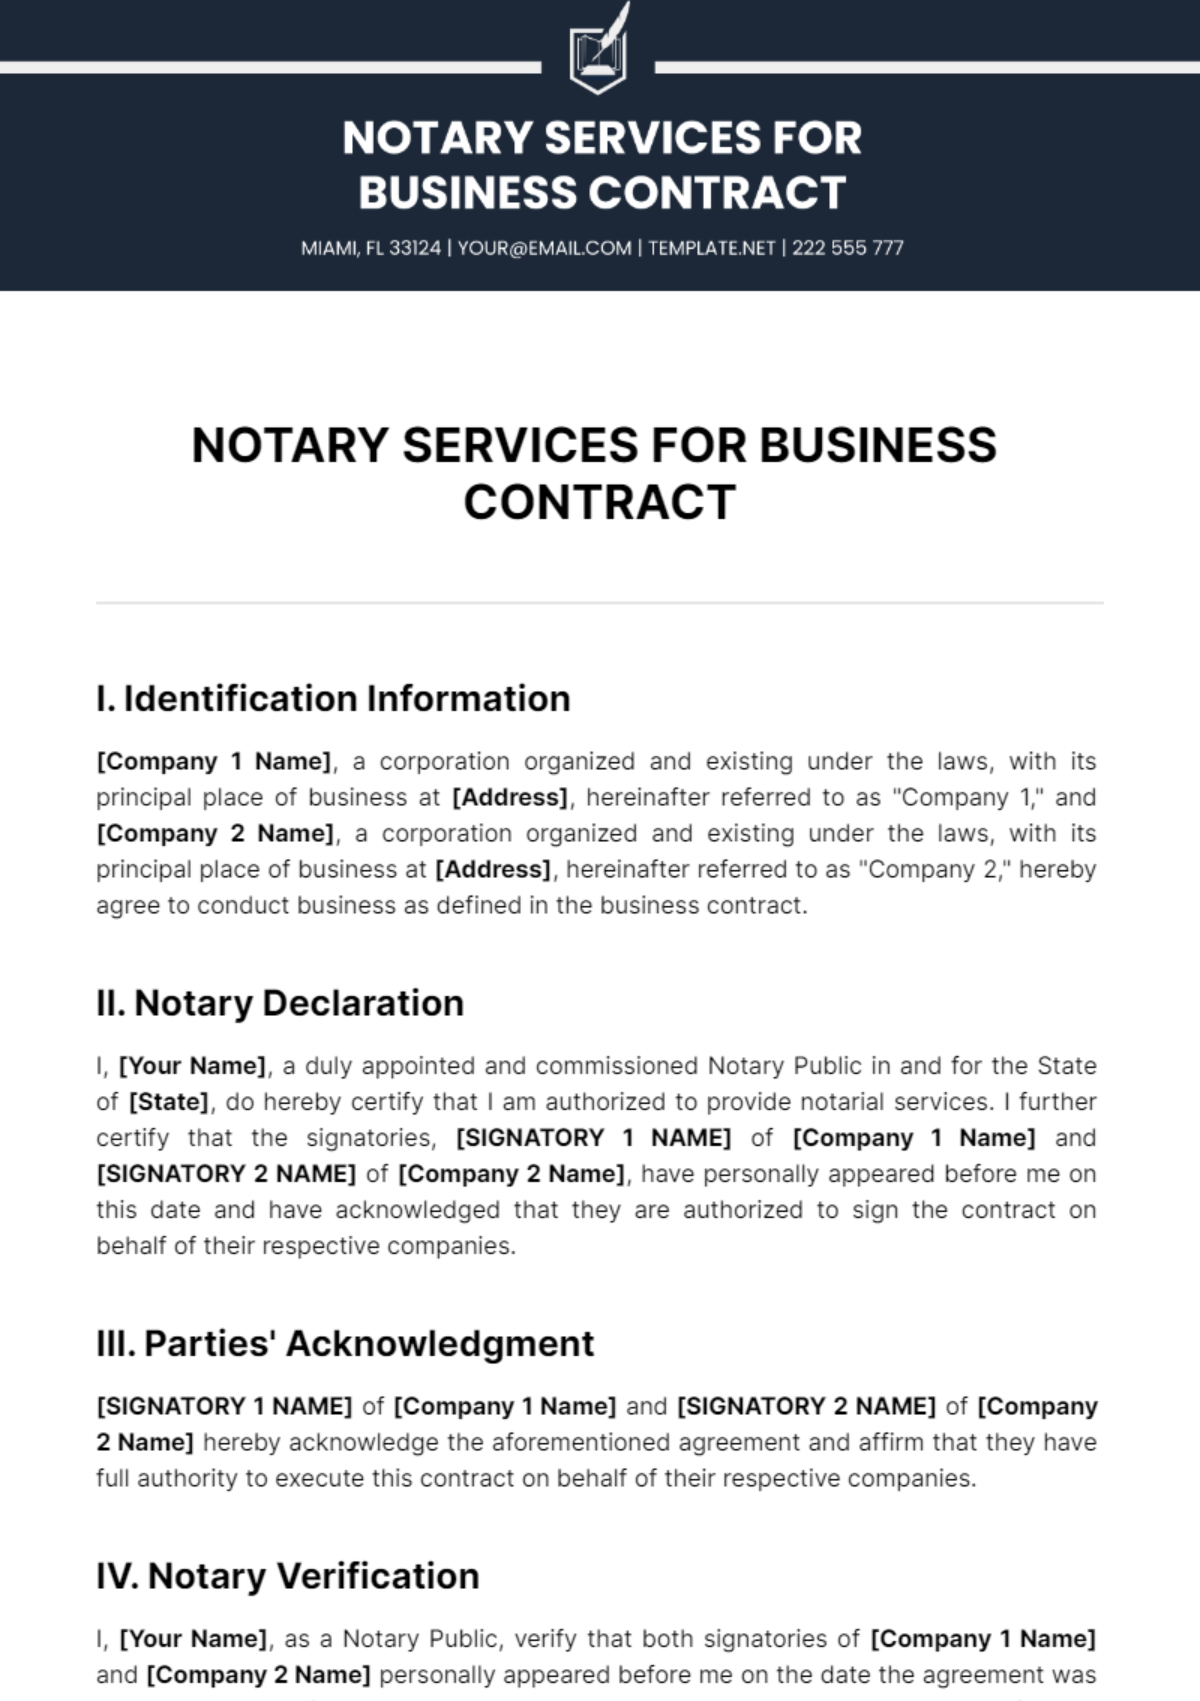 Notary Services for Business Contract Template